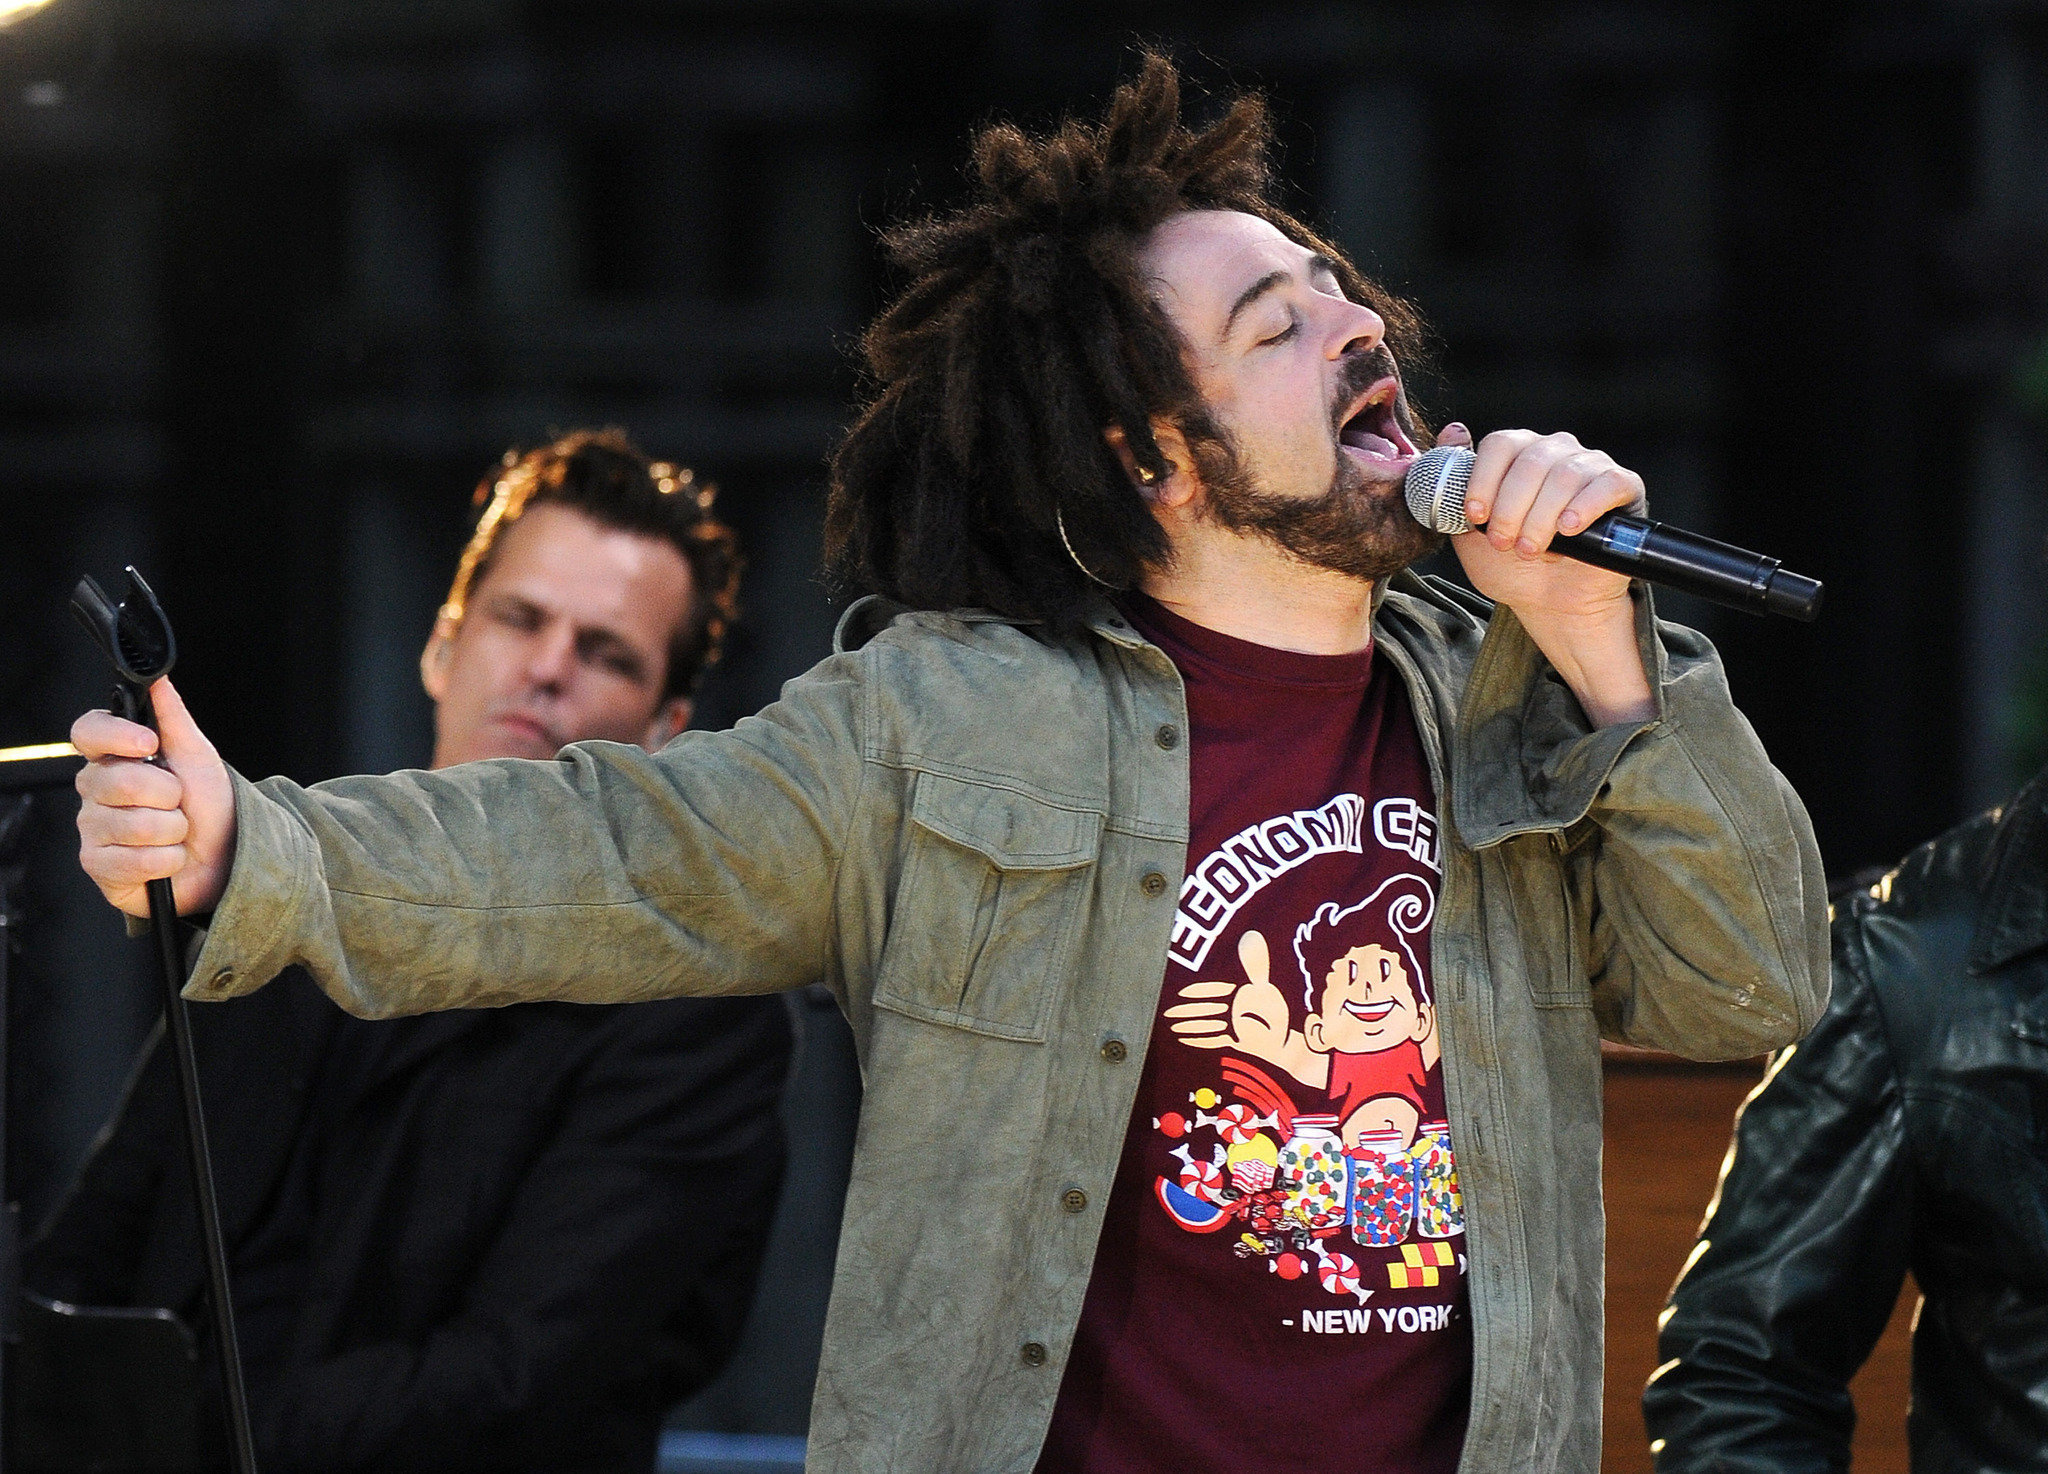 HD wallpaper, Counting Crows, Adam Duritz, Mlive